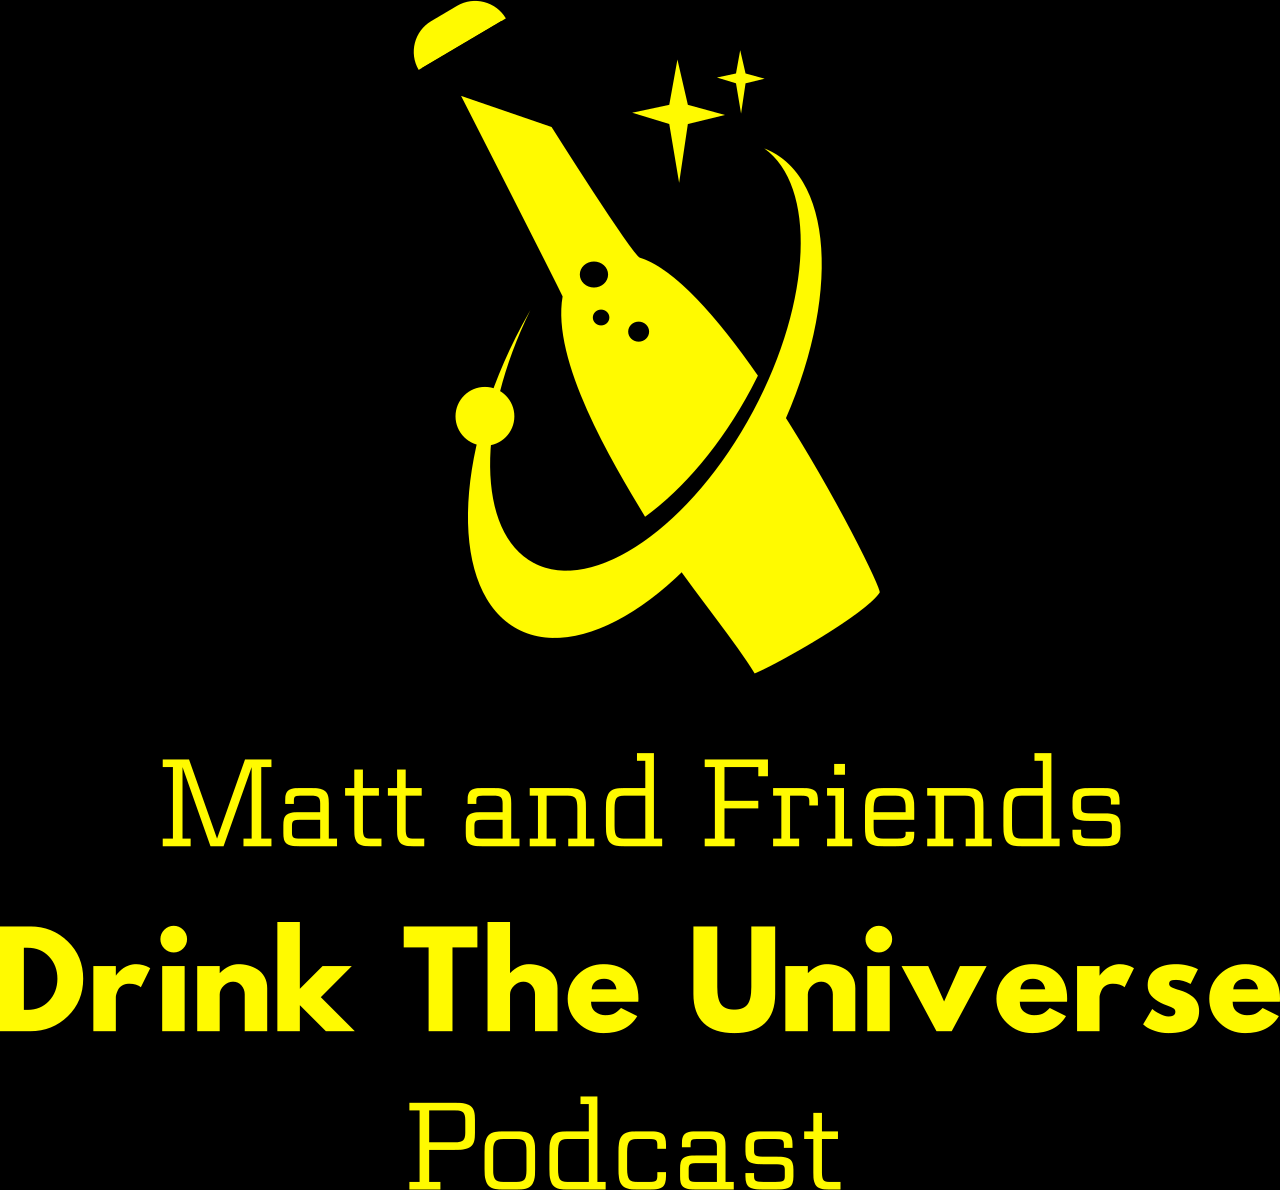  Matt and Friends Drink the Universe Podcast's logo